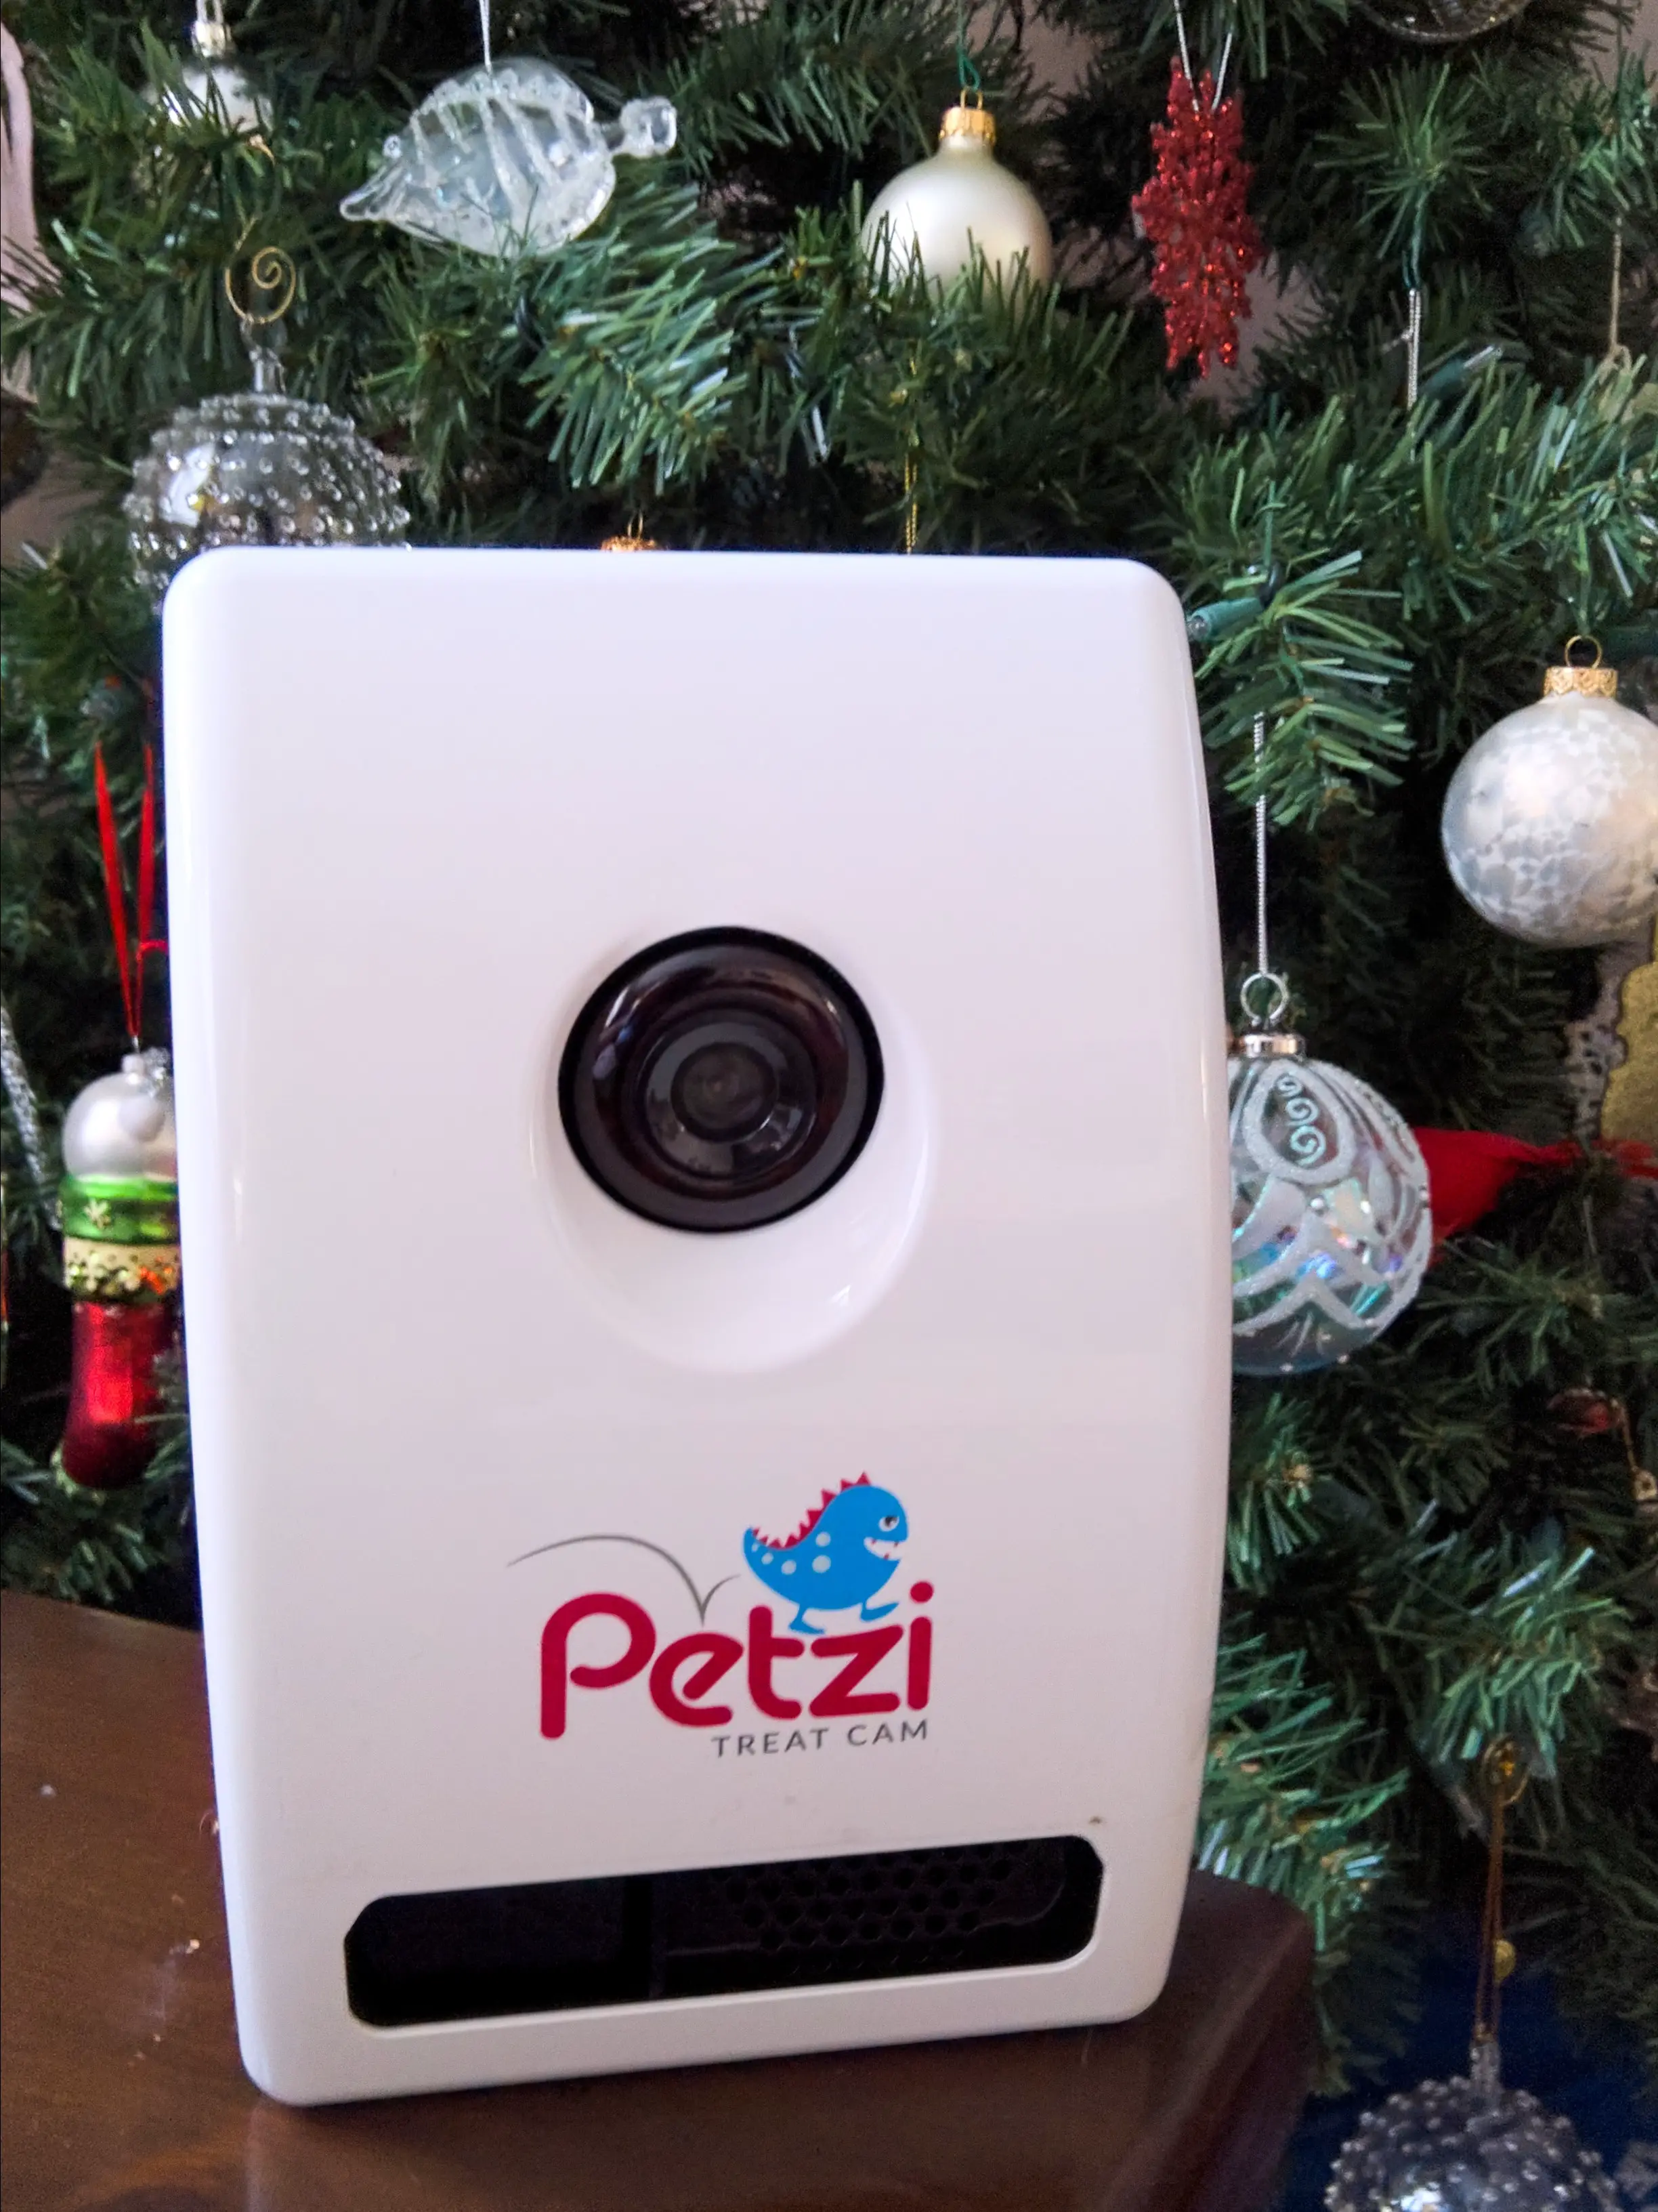 Petzi Treat Cam: The Perfect Holiday Gift For A Dog Family